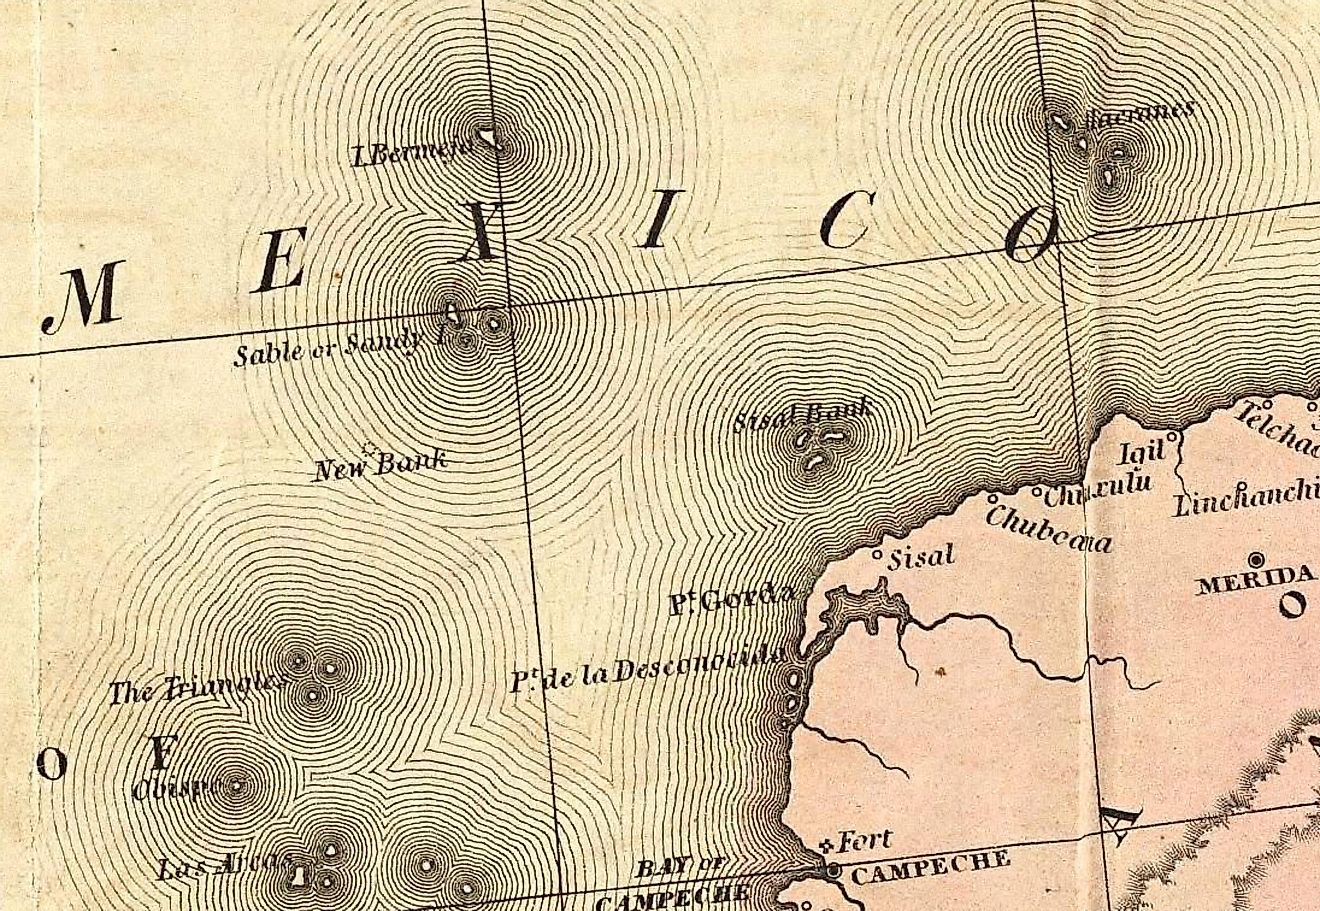 Several maps dating from the 16th century onward show an island called Bermeja that could not be found by any search party to this day.